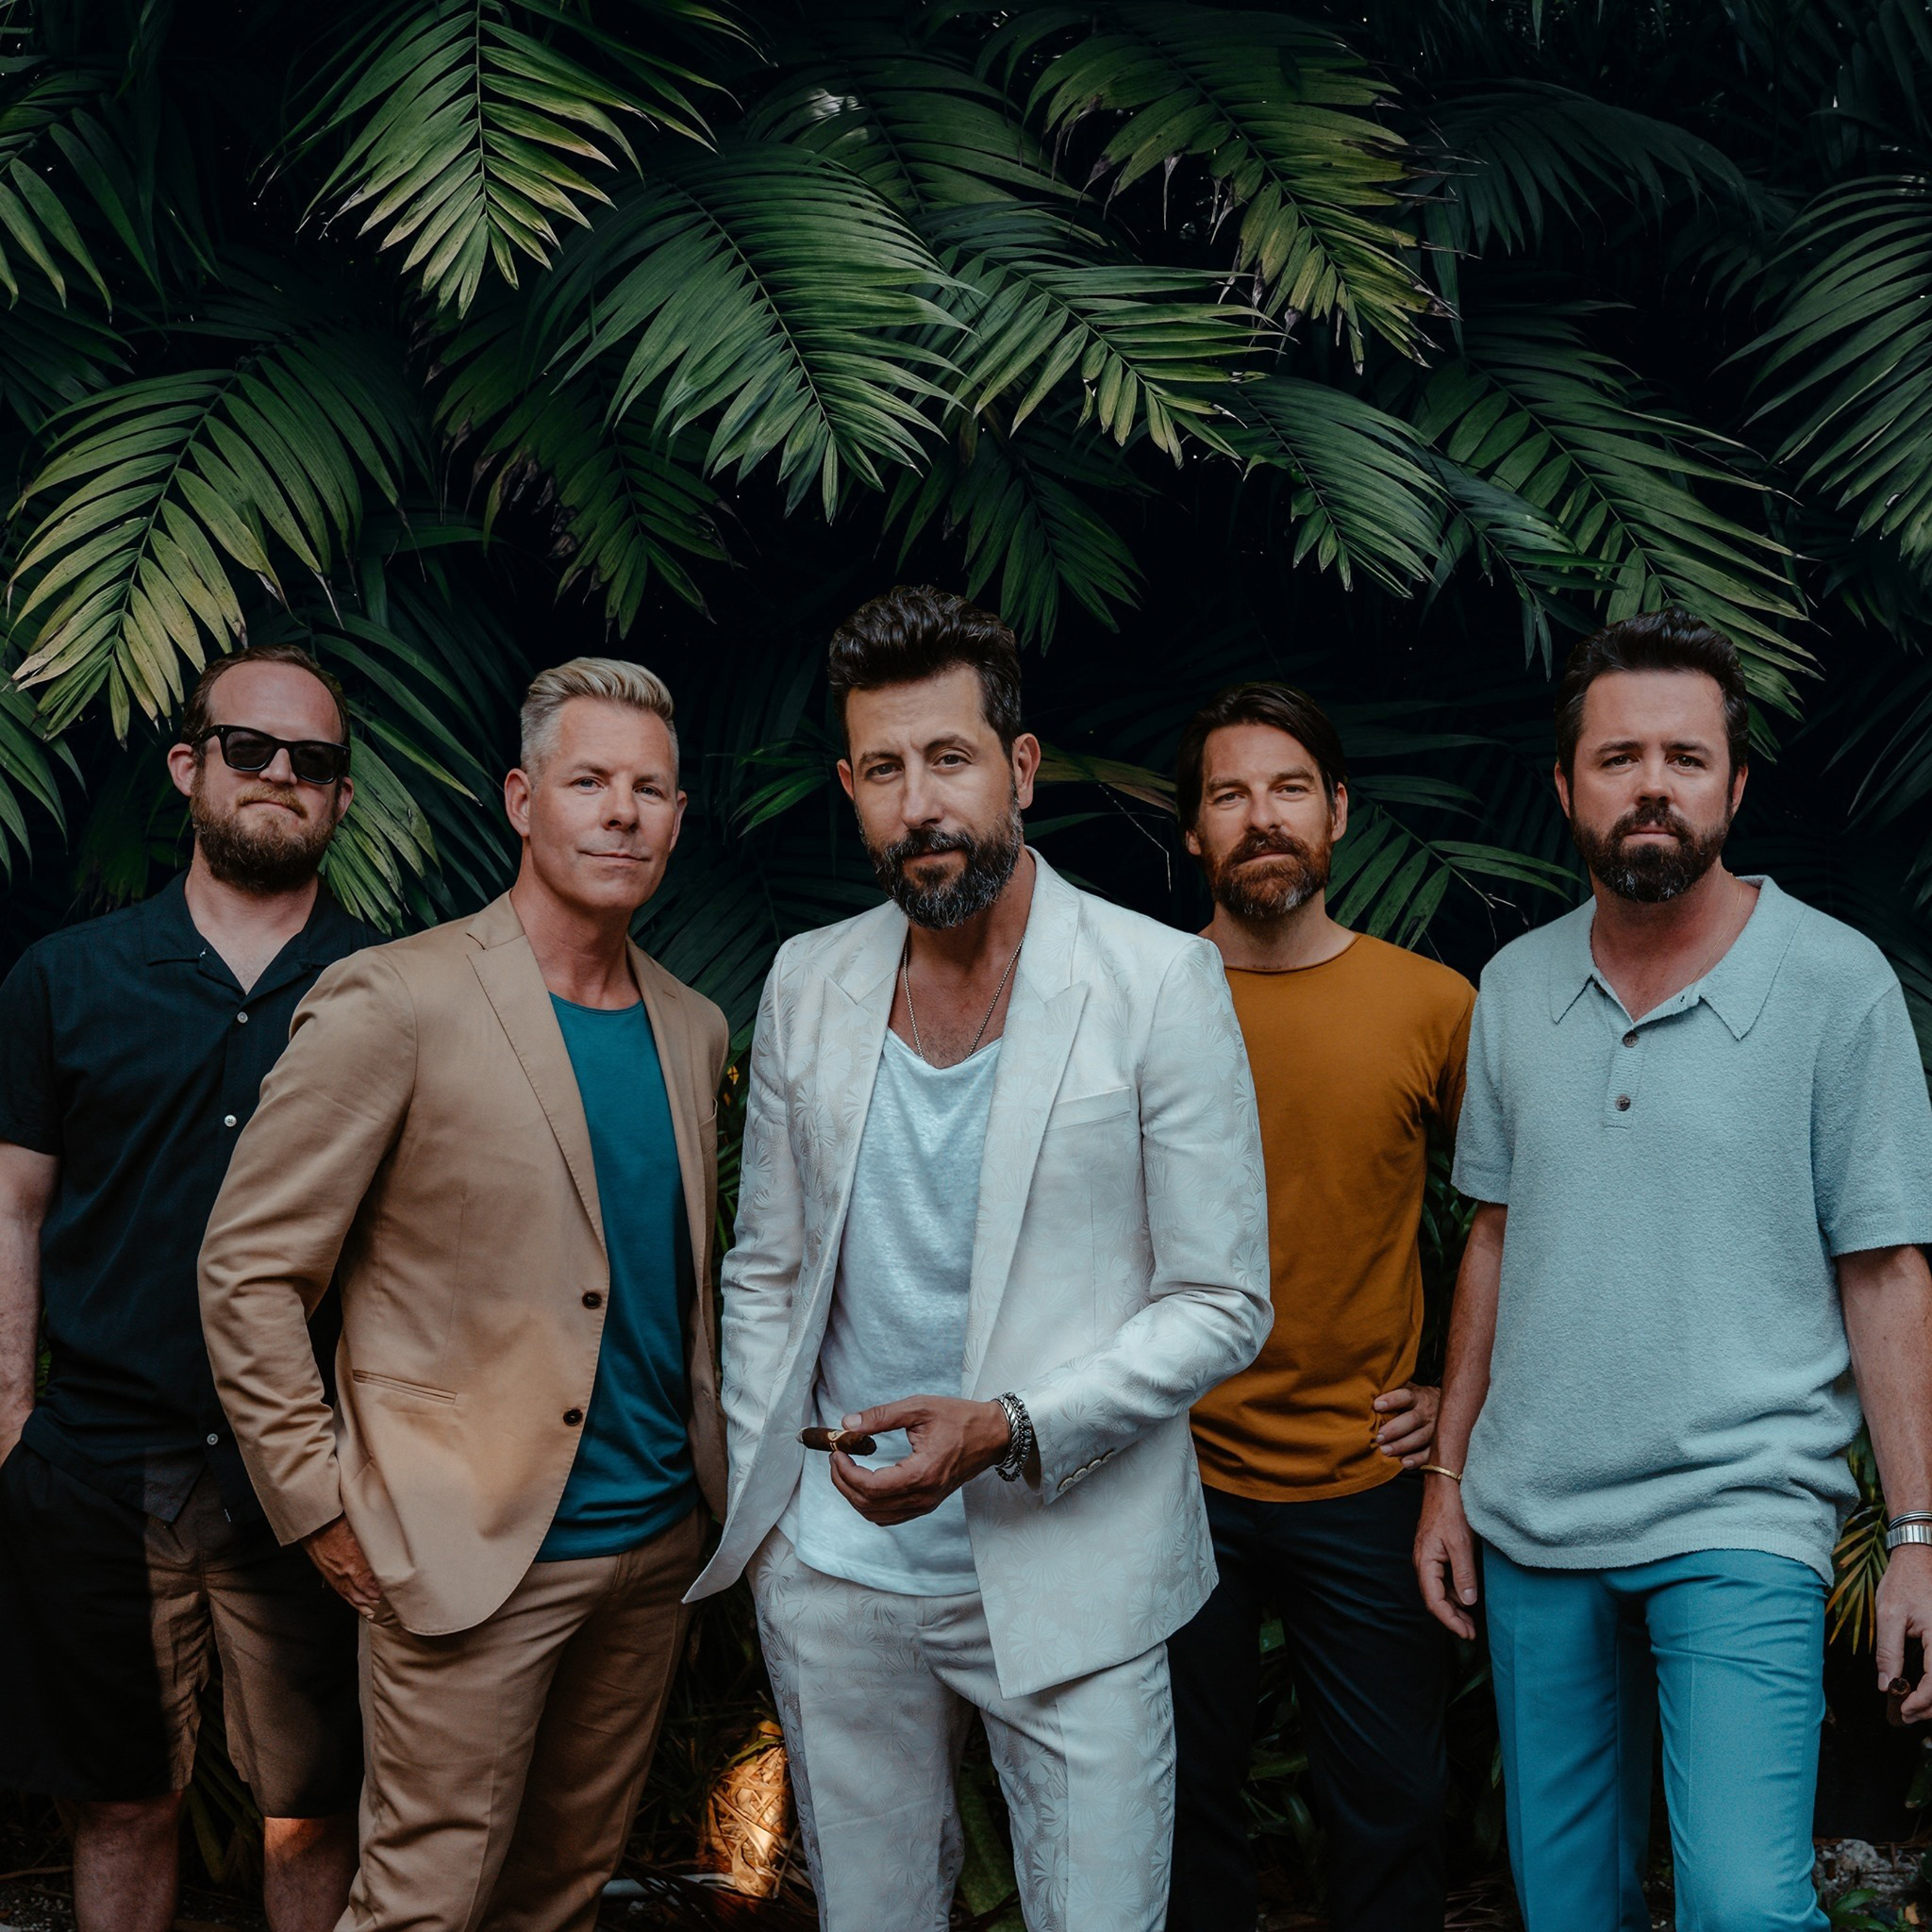 OLD DOMINION return with new album 'Time, Tequila & Therapy' in October 2